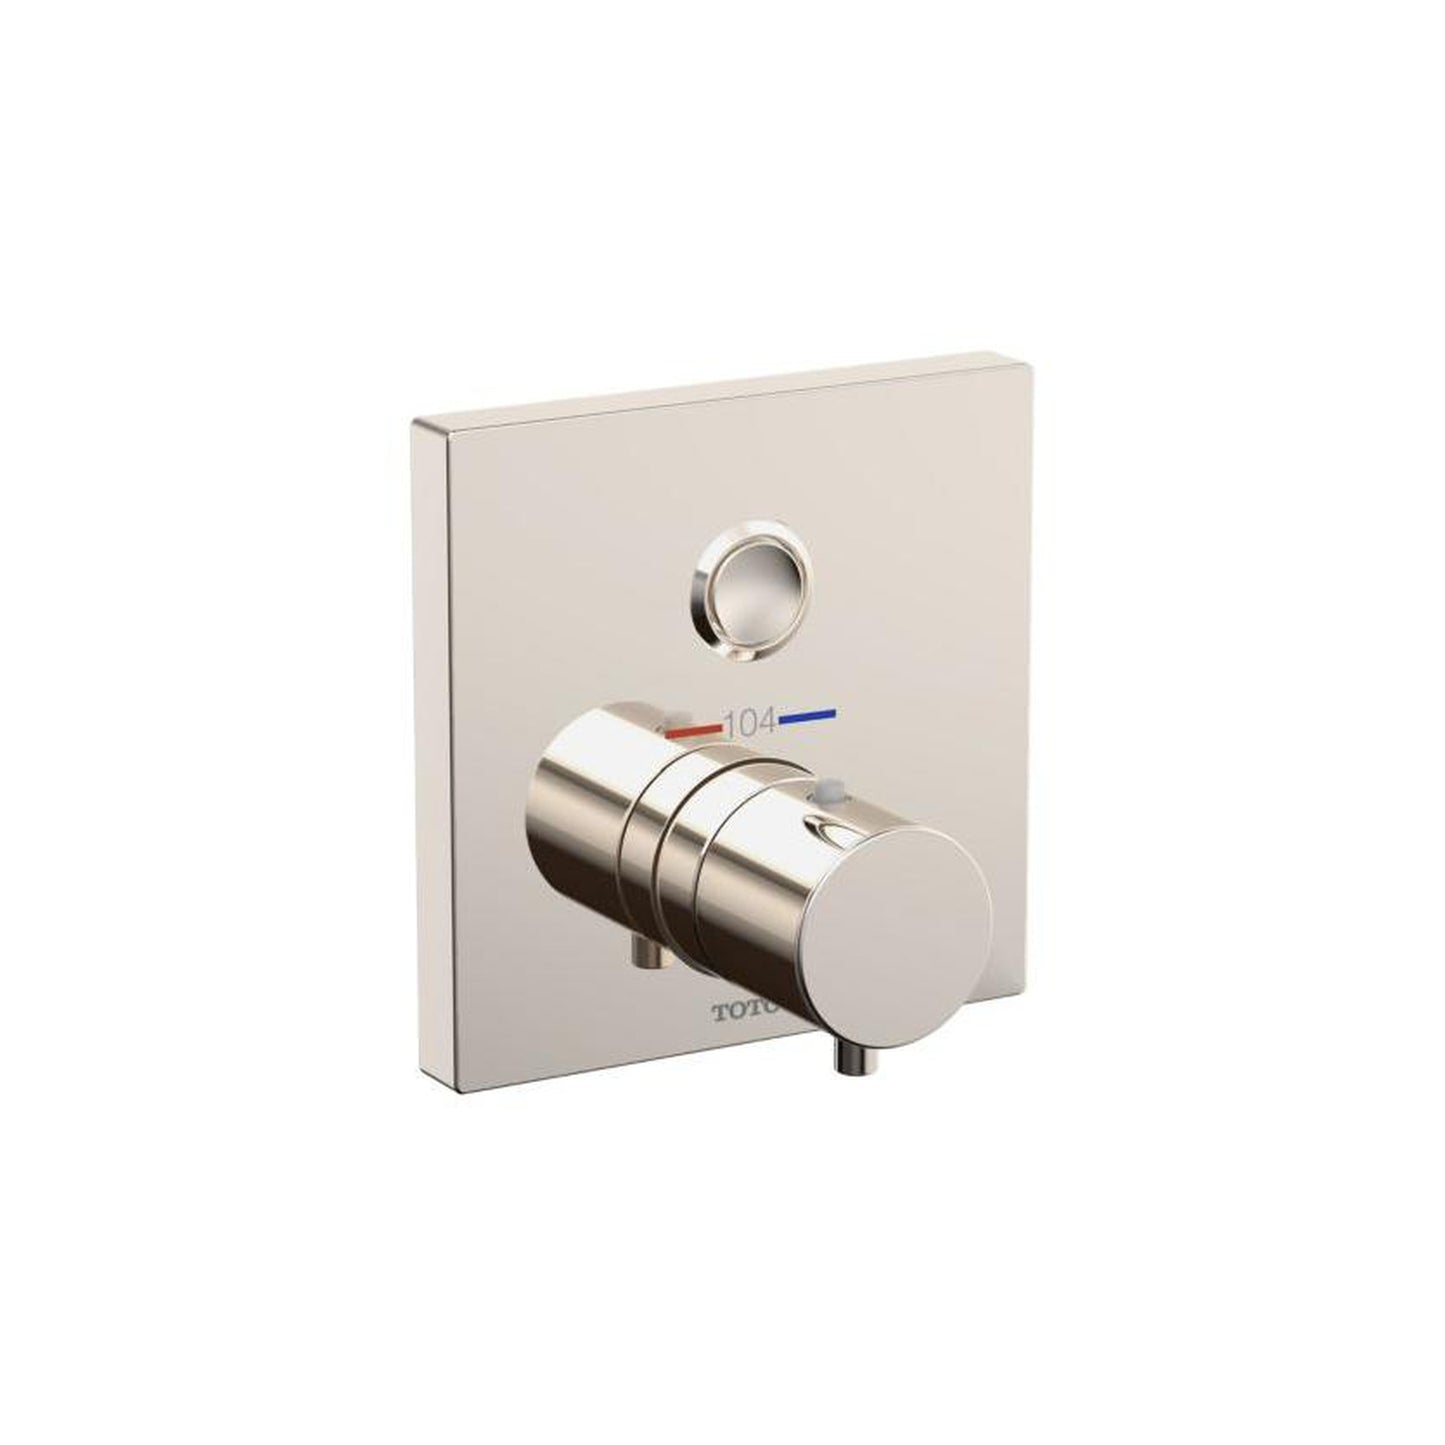 Toto Thermo 1WAY Polished Nickel Push Button Valve